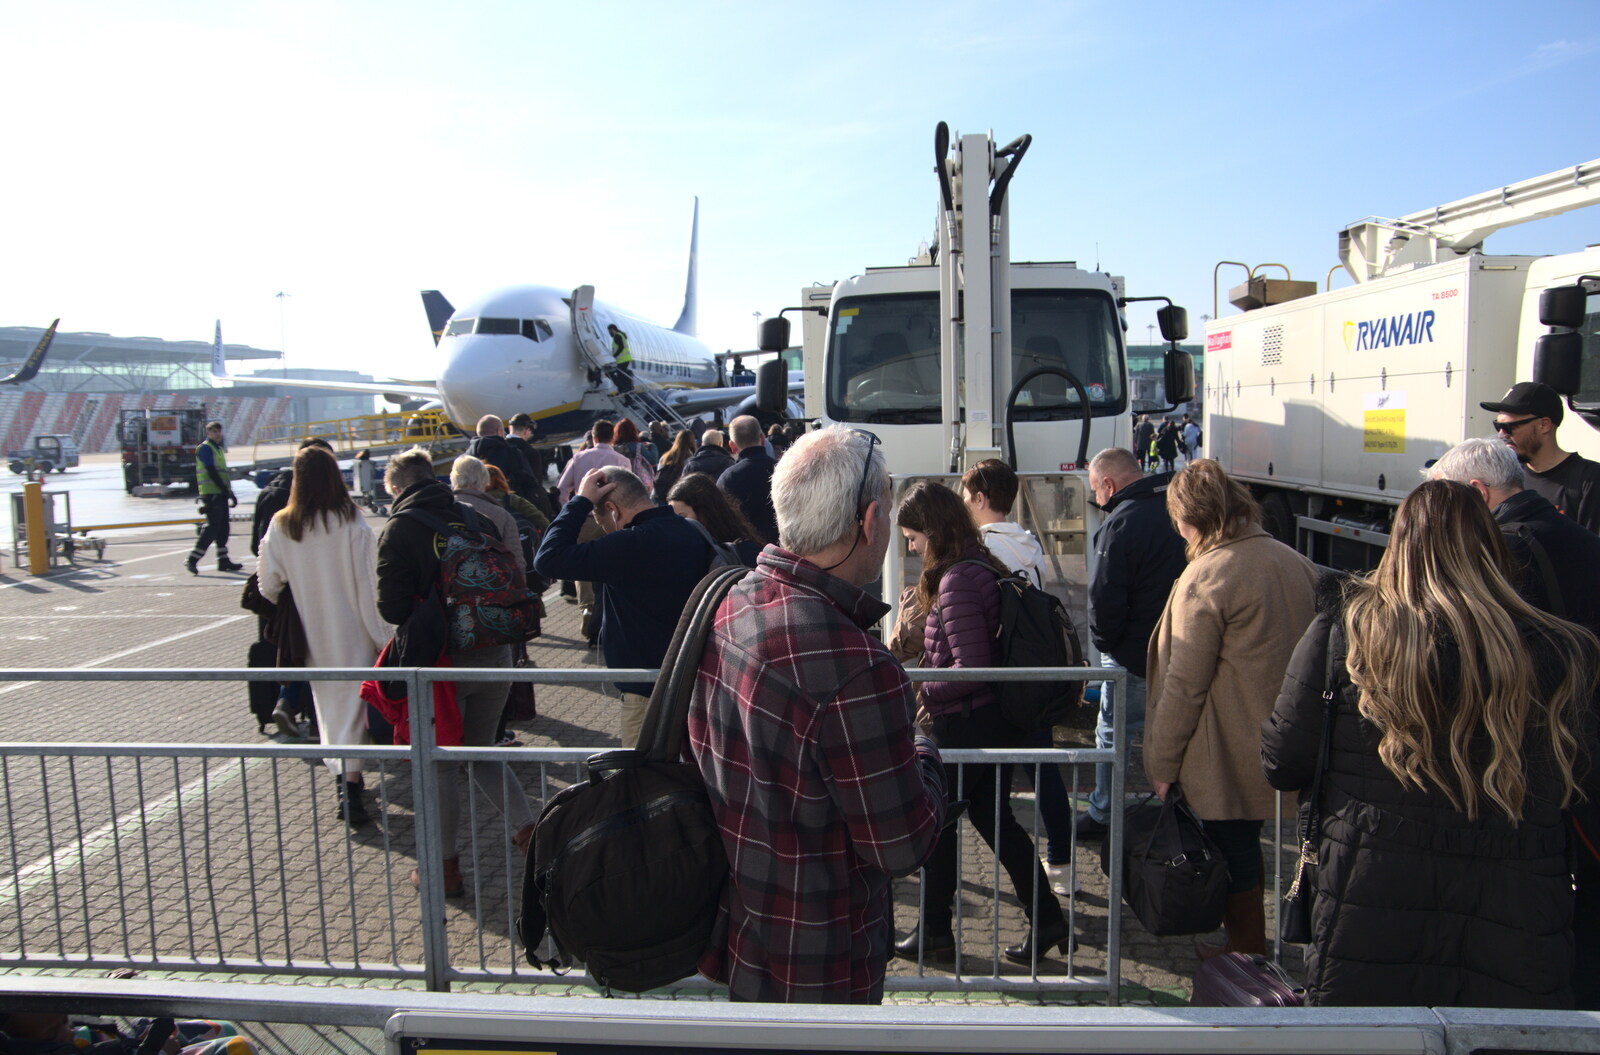 Blackrock North and Newgrange, County Louth, Ireland - 16th February 2023: Ryanair's new loading scheme involves more queueing